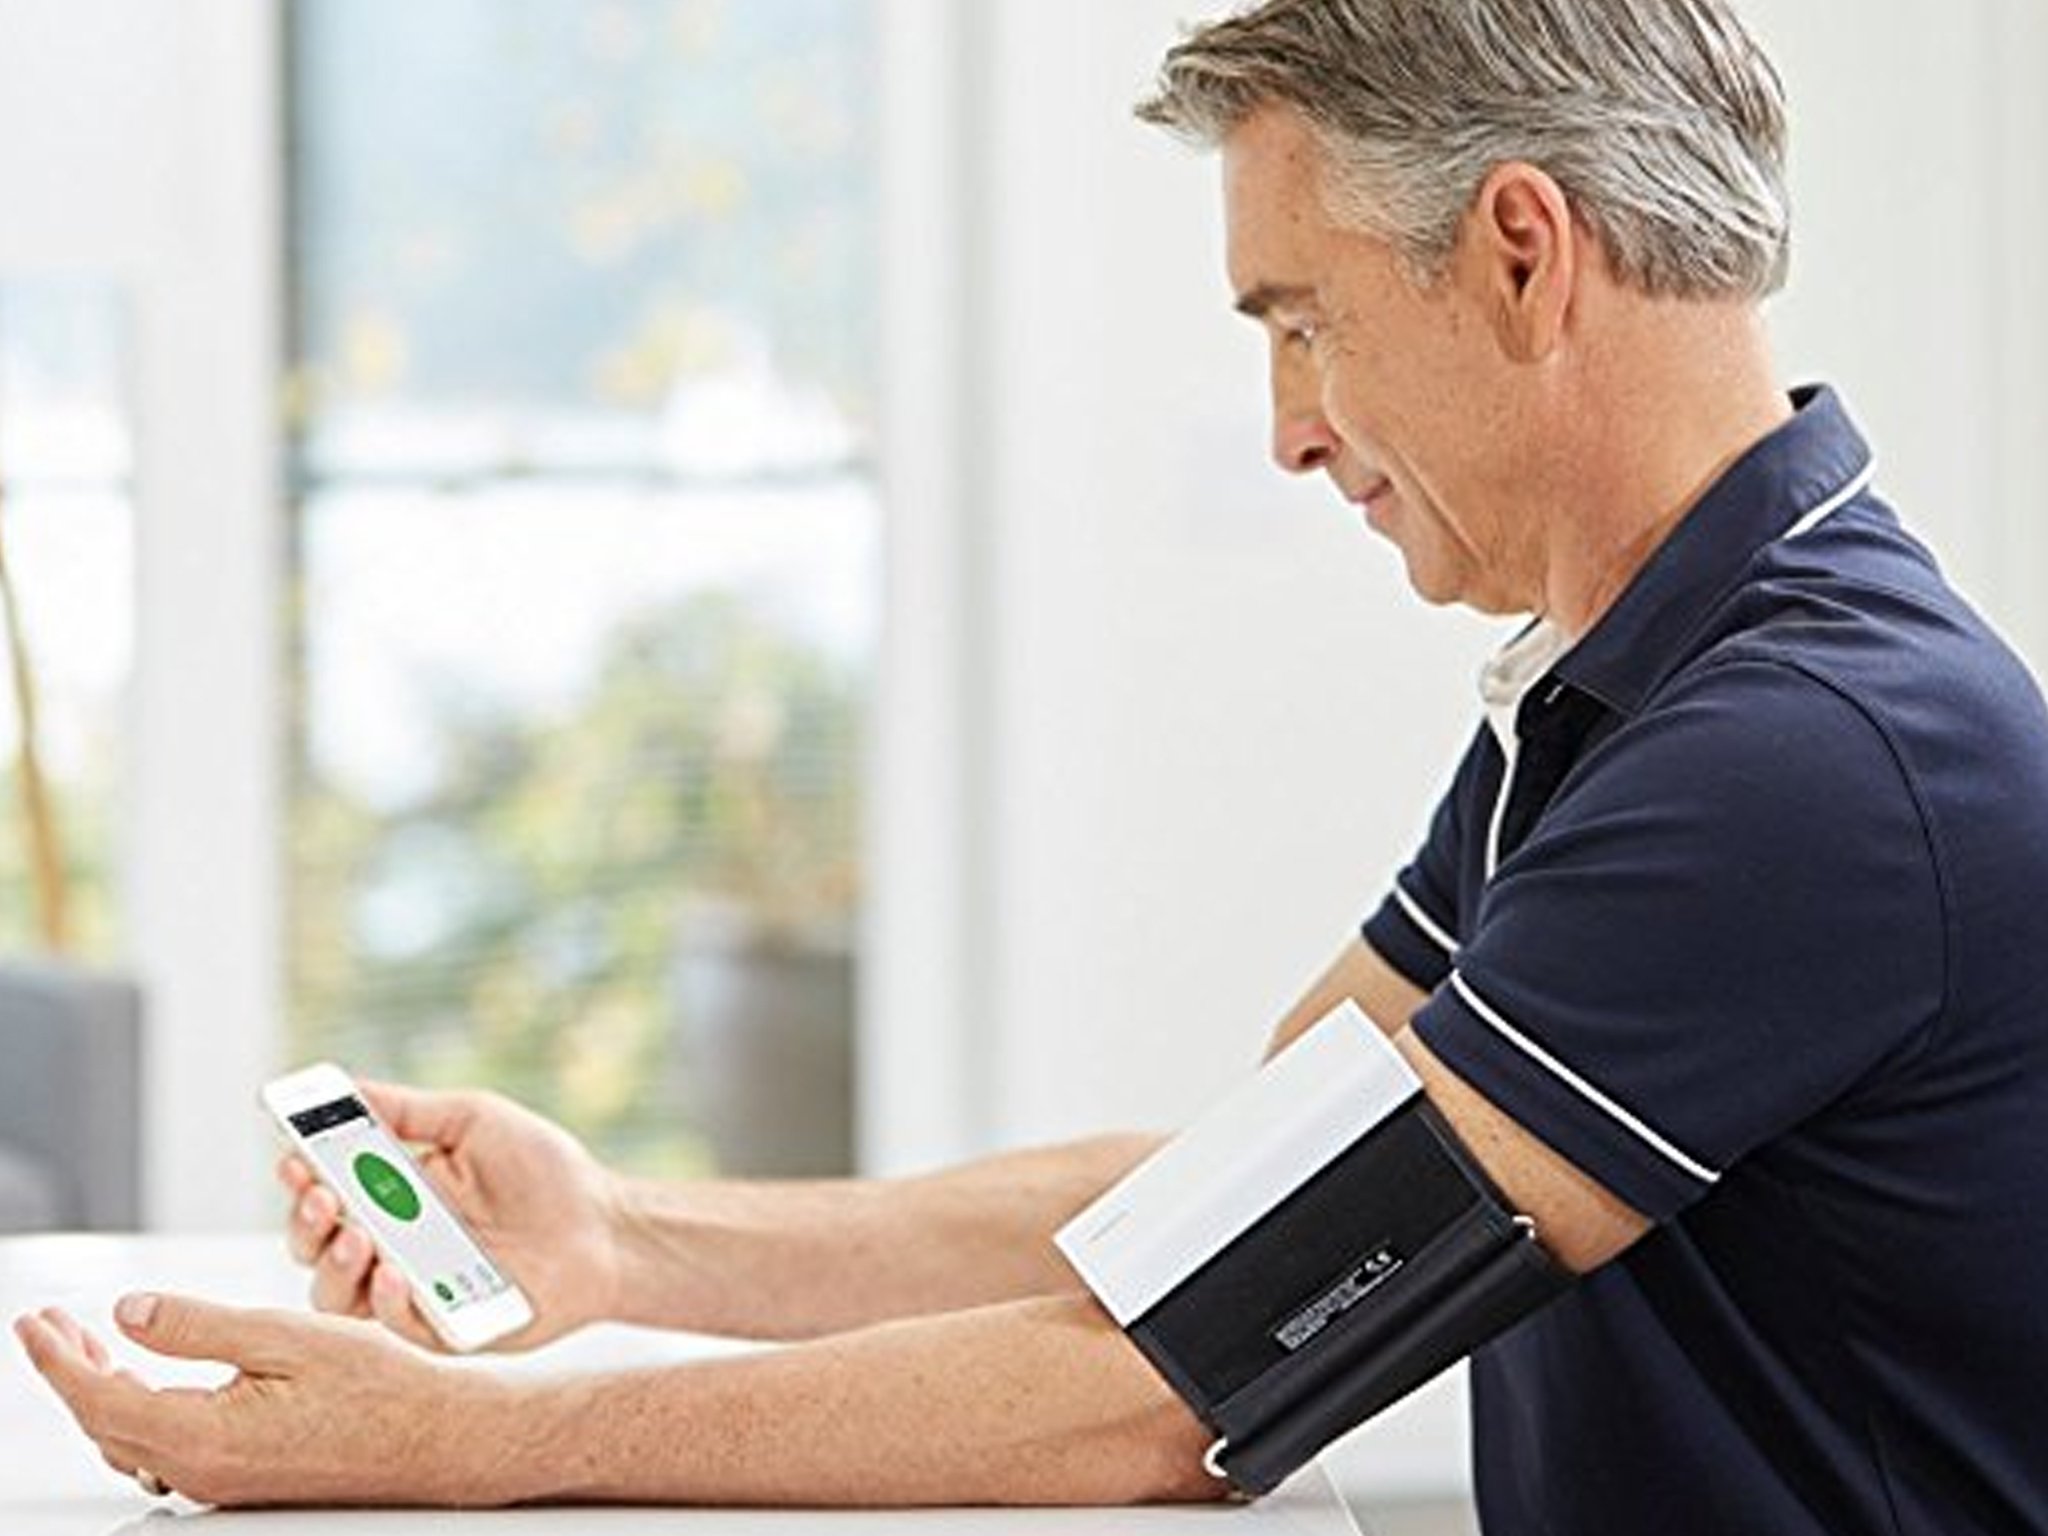 iHealth's Smart Upper Arm Blood Pressure Monitor syncs with Apple Health at  low of $25